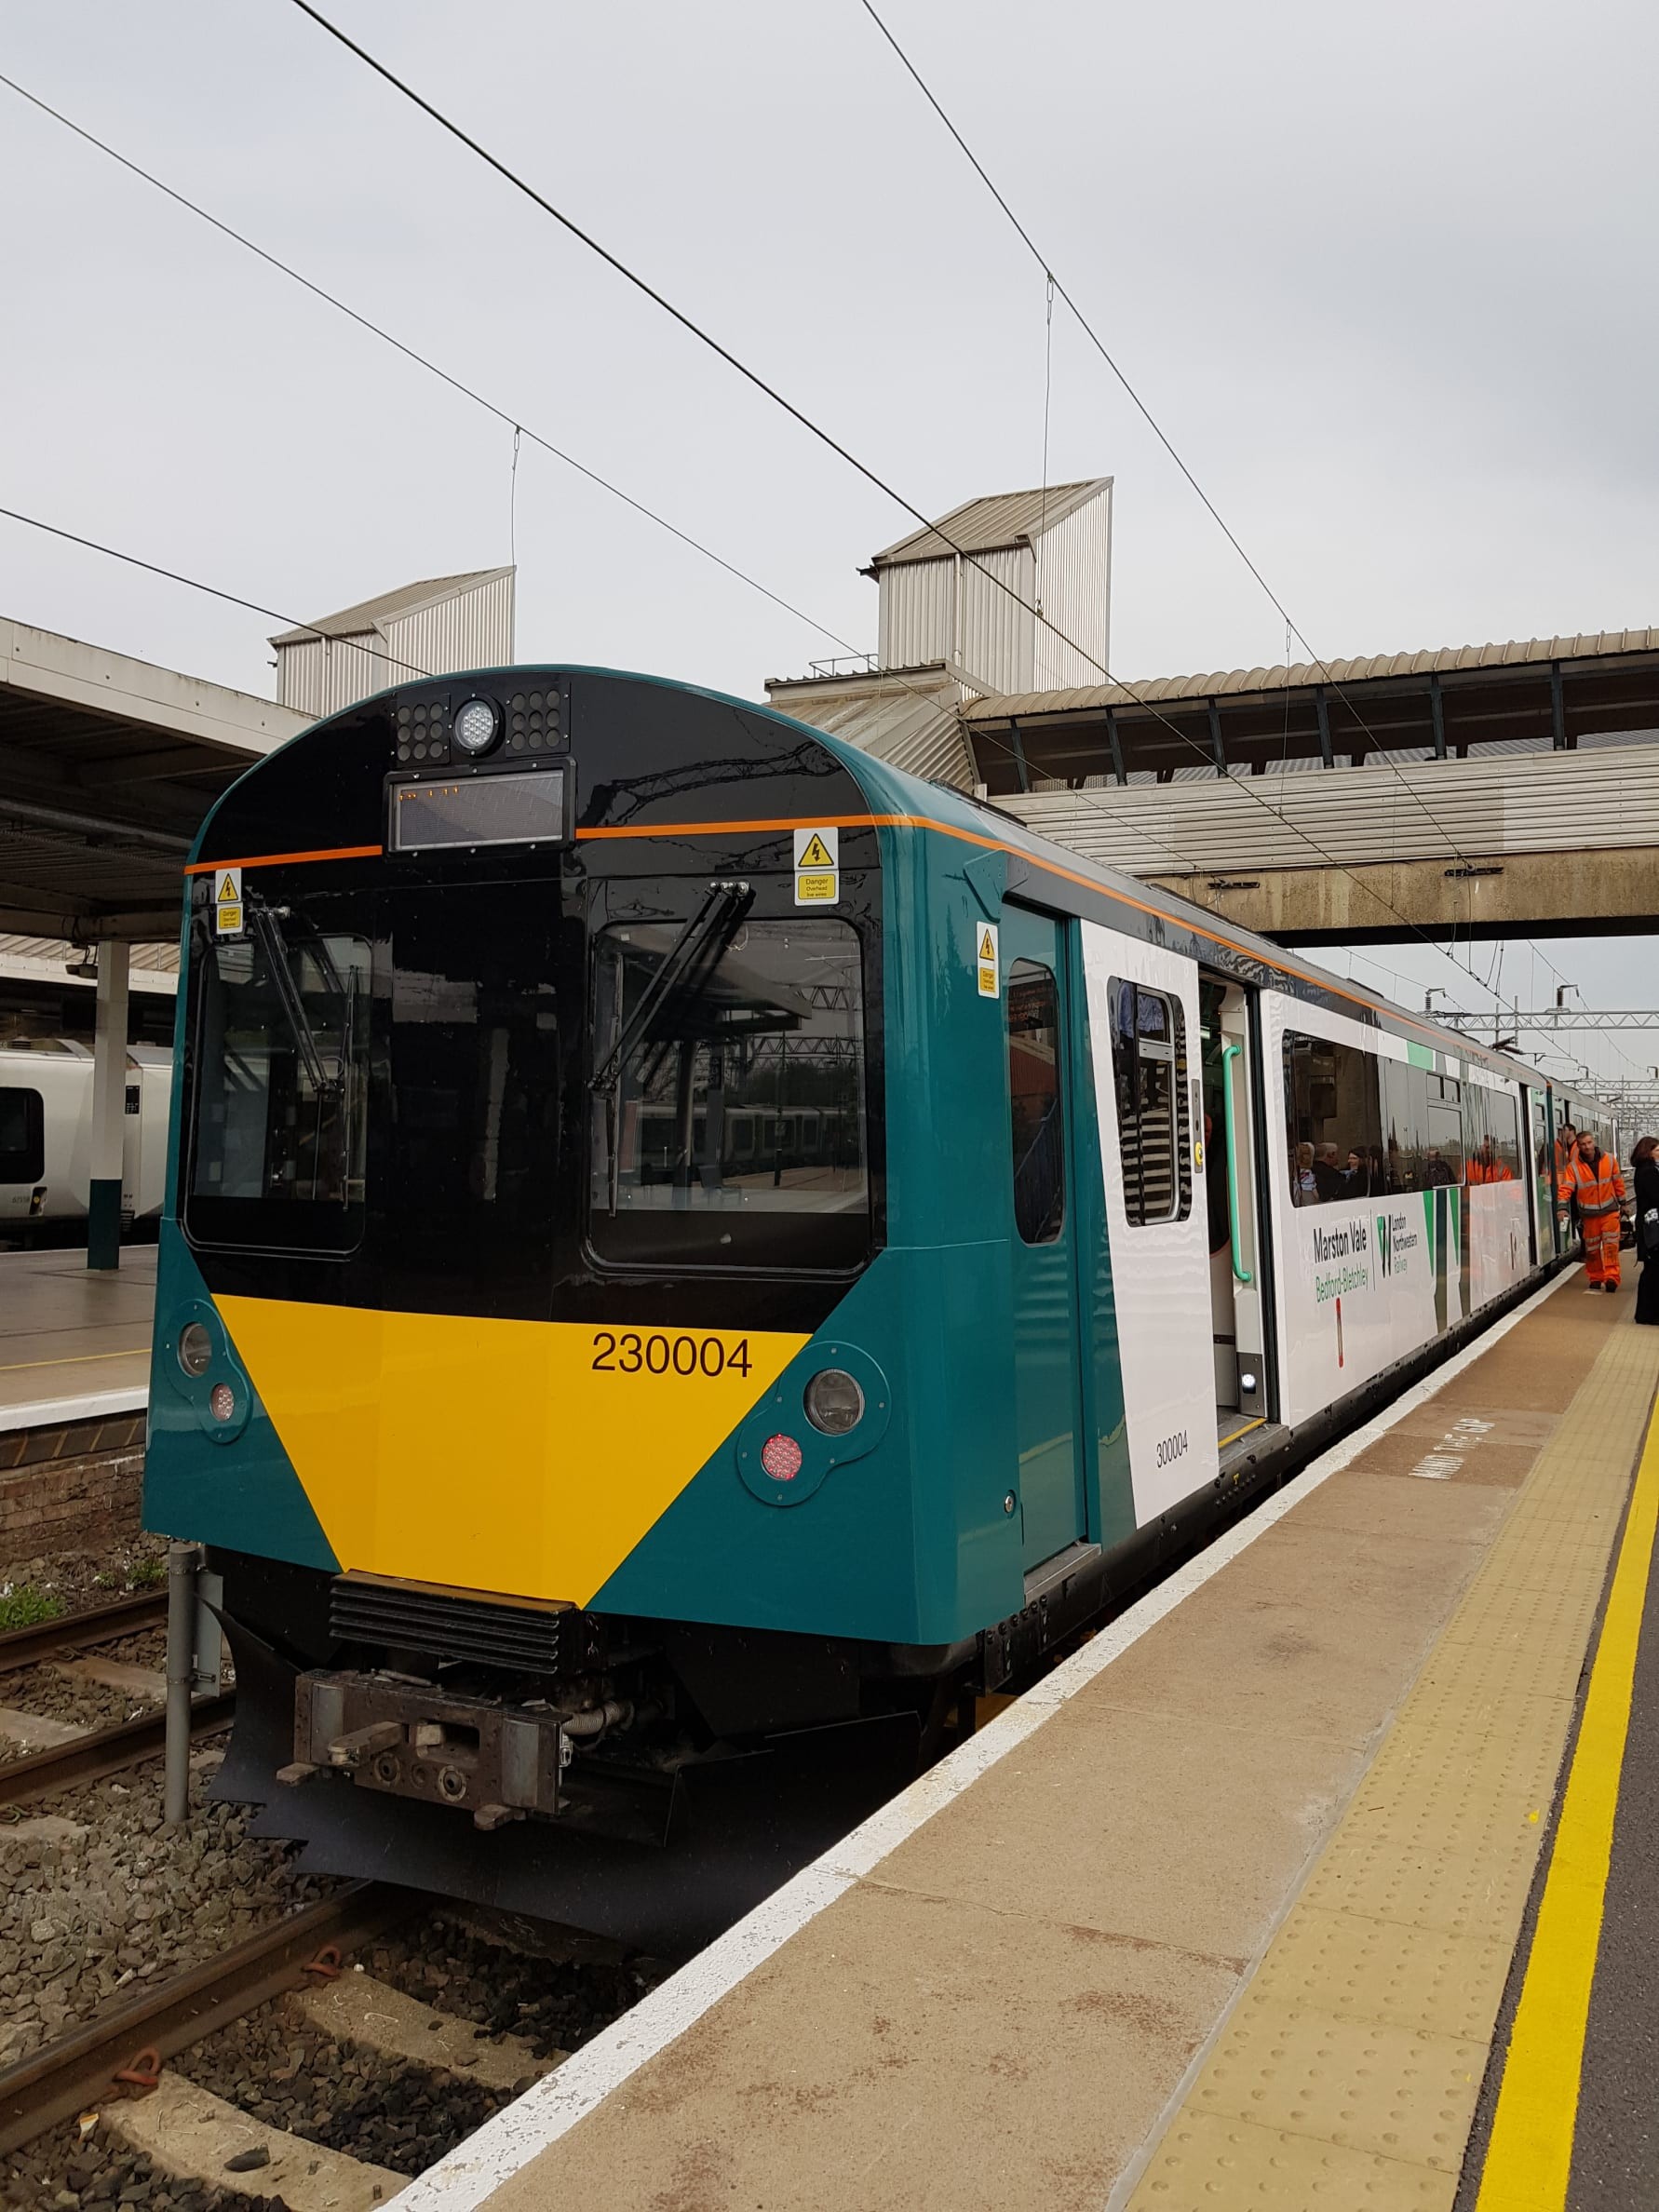 Passengers warned of delays on Marston Vale Line as level crossing malfunctions